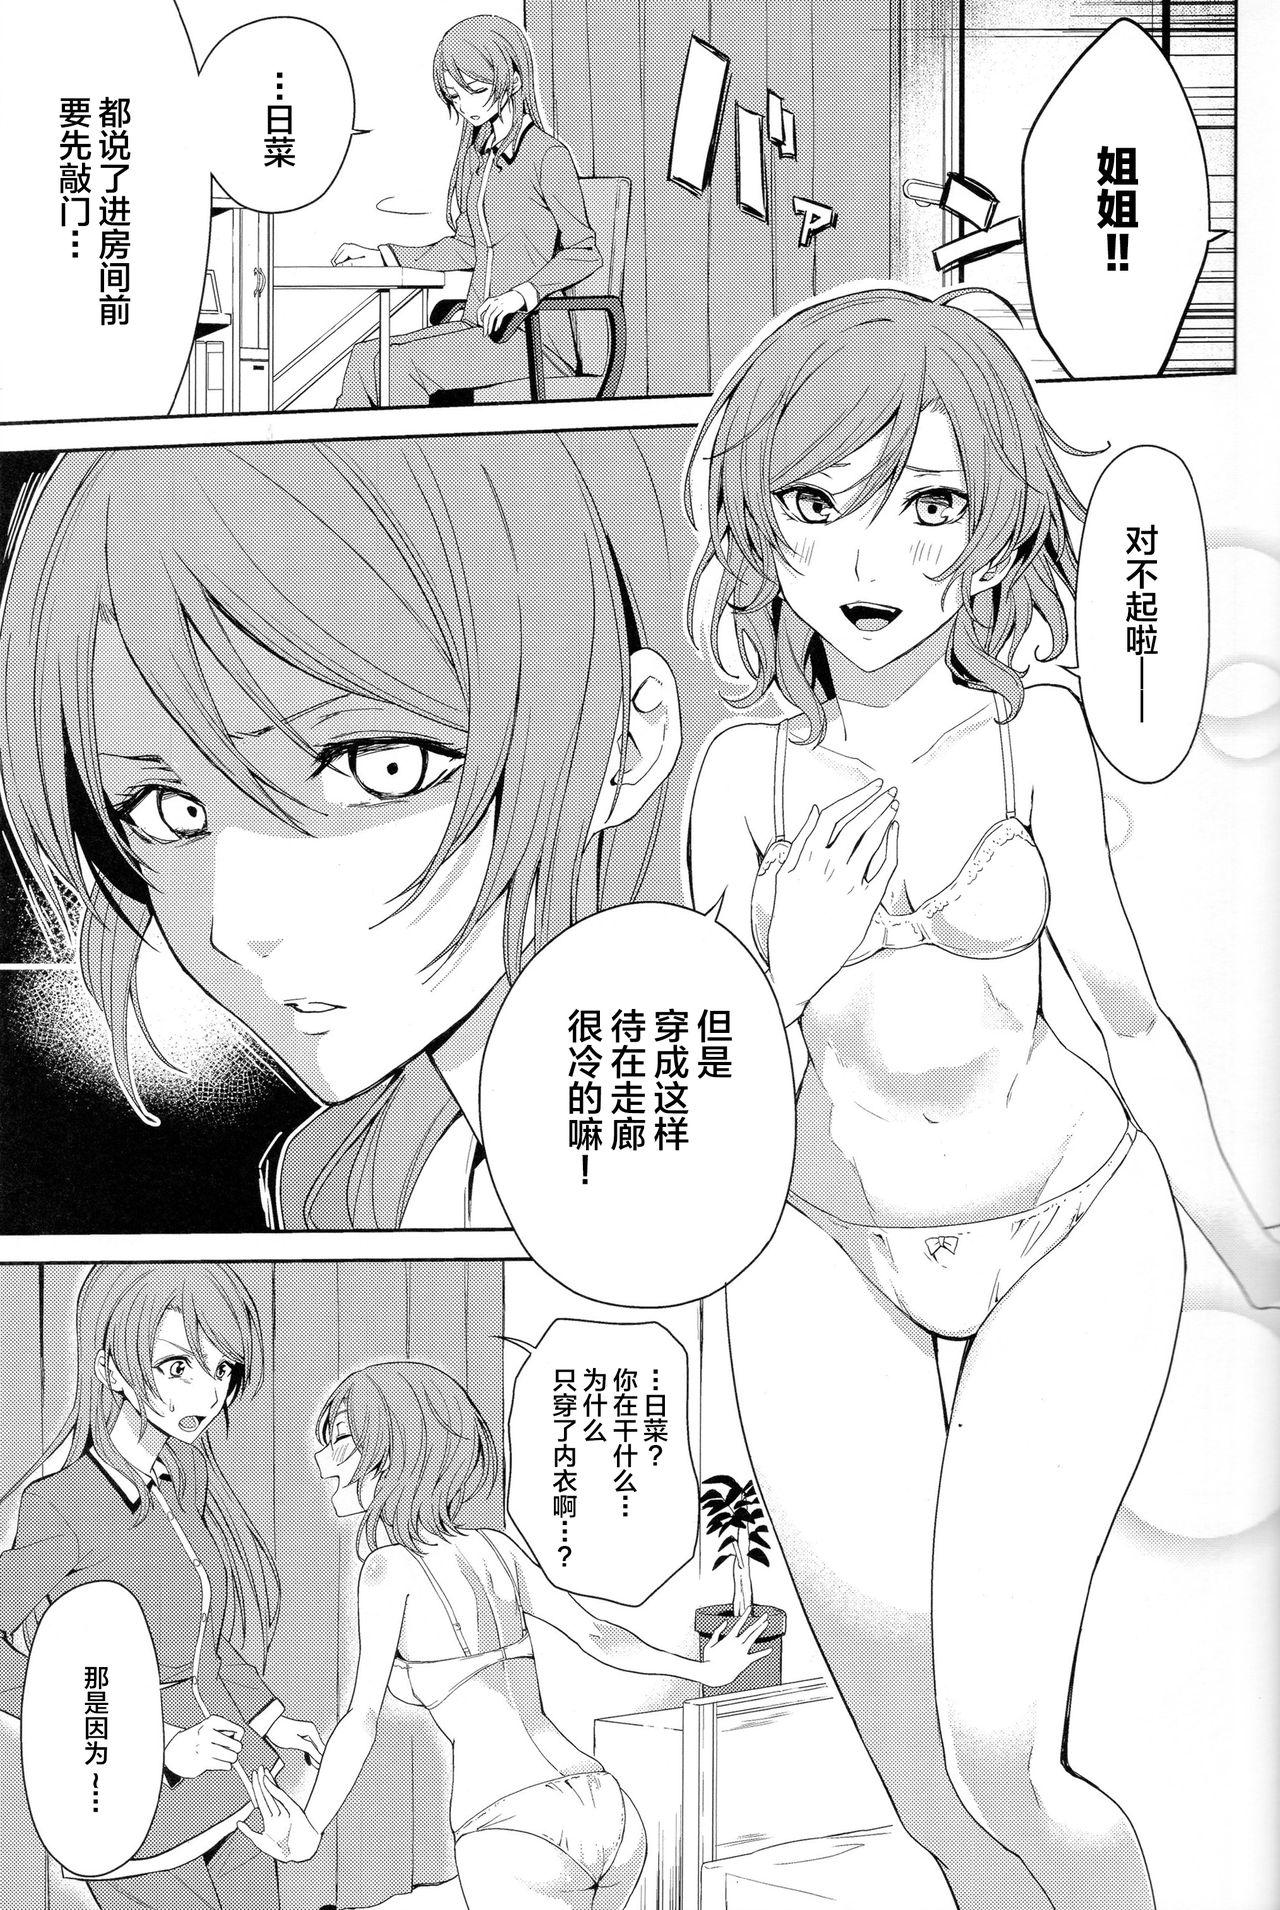 Perverted Onee-chan to! - Bang dream Picked Up - Page 2